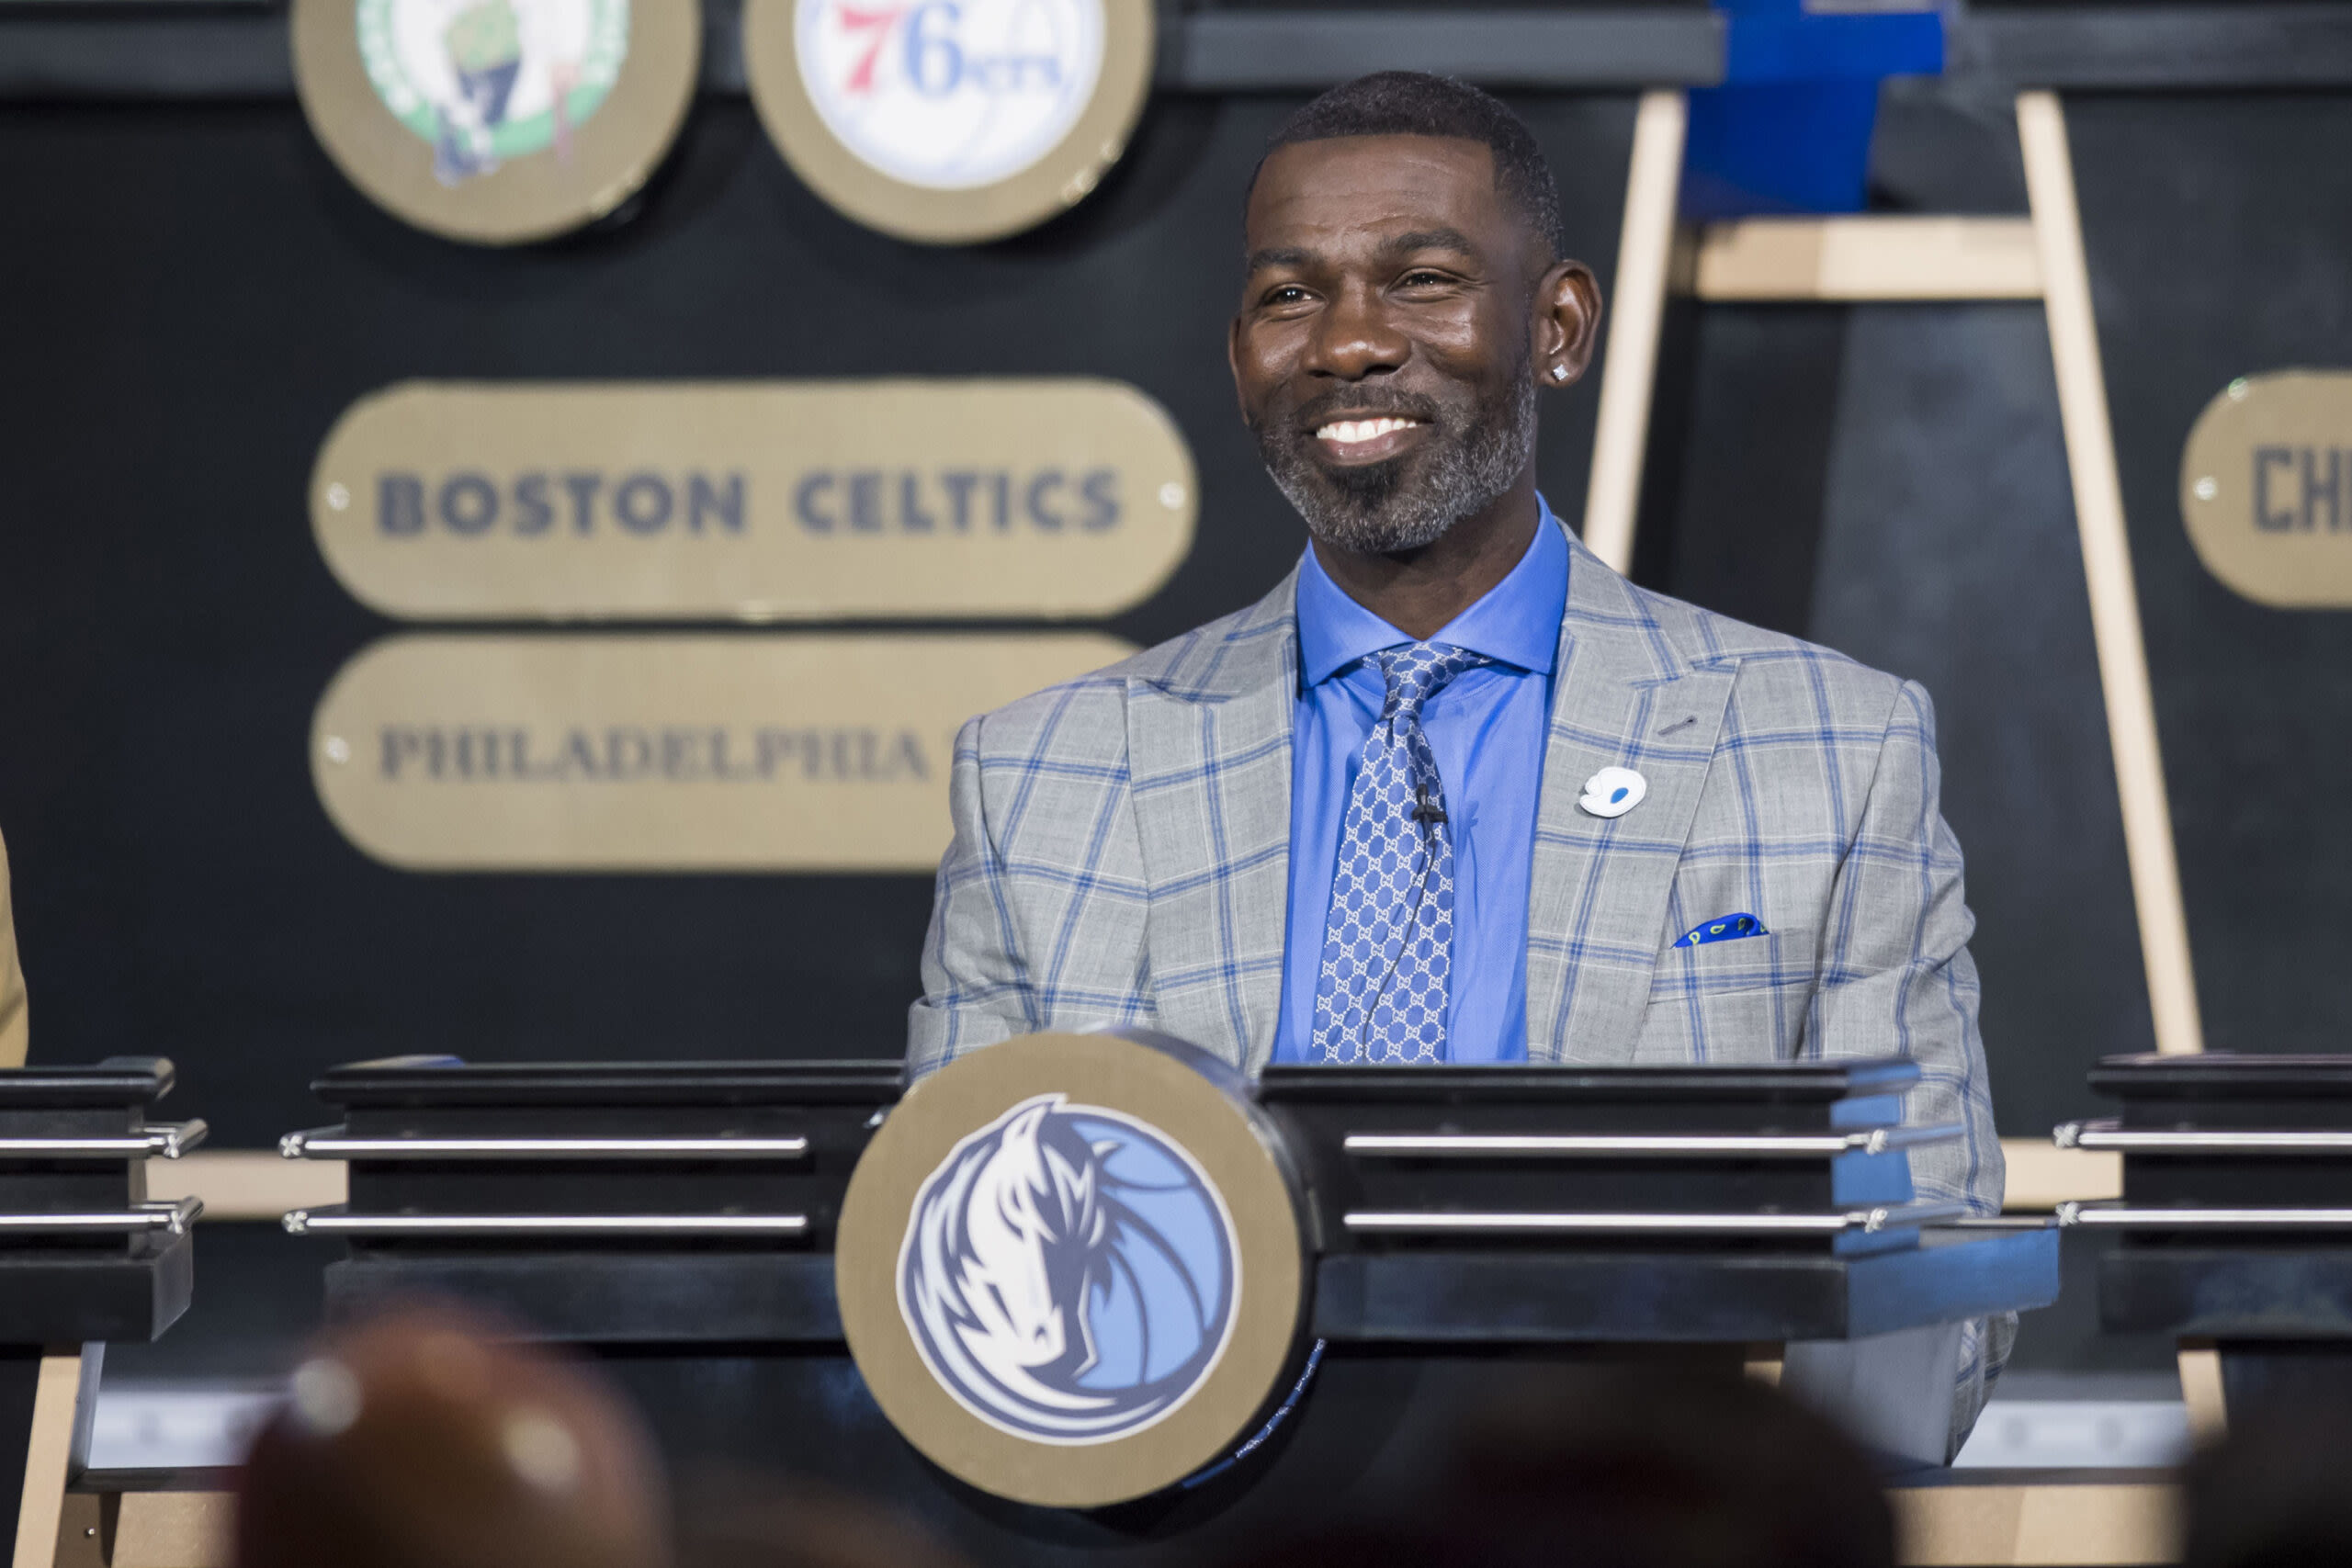 WATCH: Wisconsin legend Michael Finley steals beer from Luka Doncic in viral moment